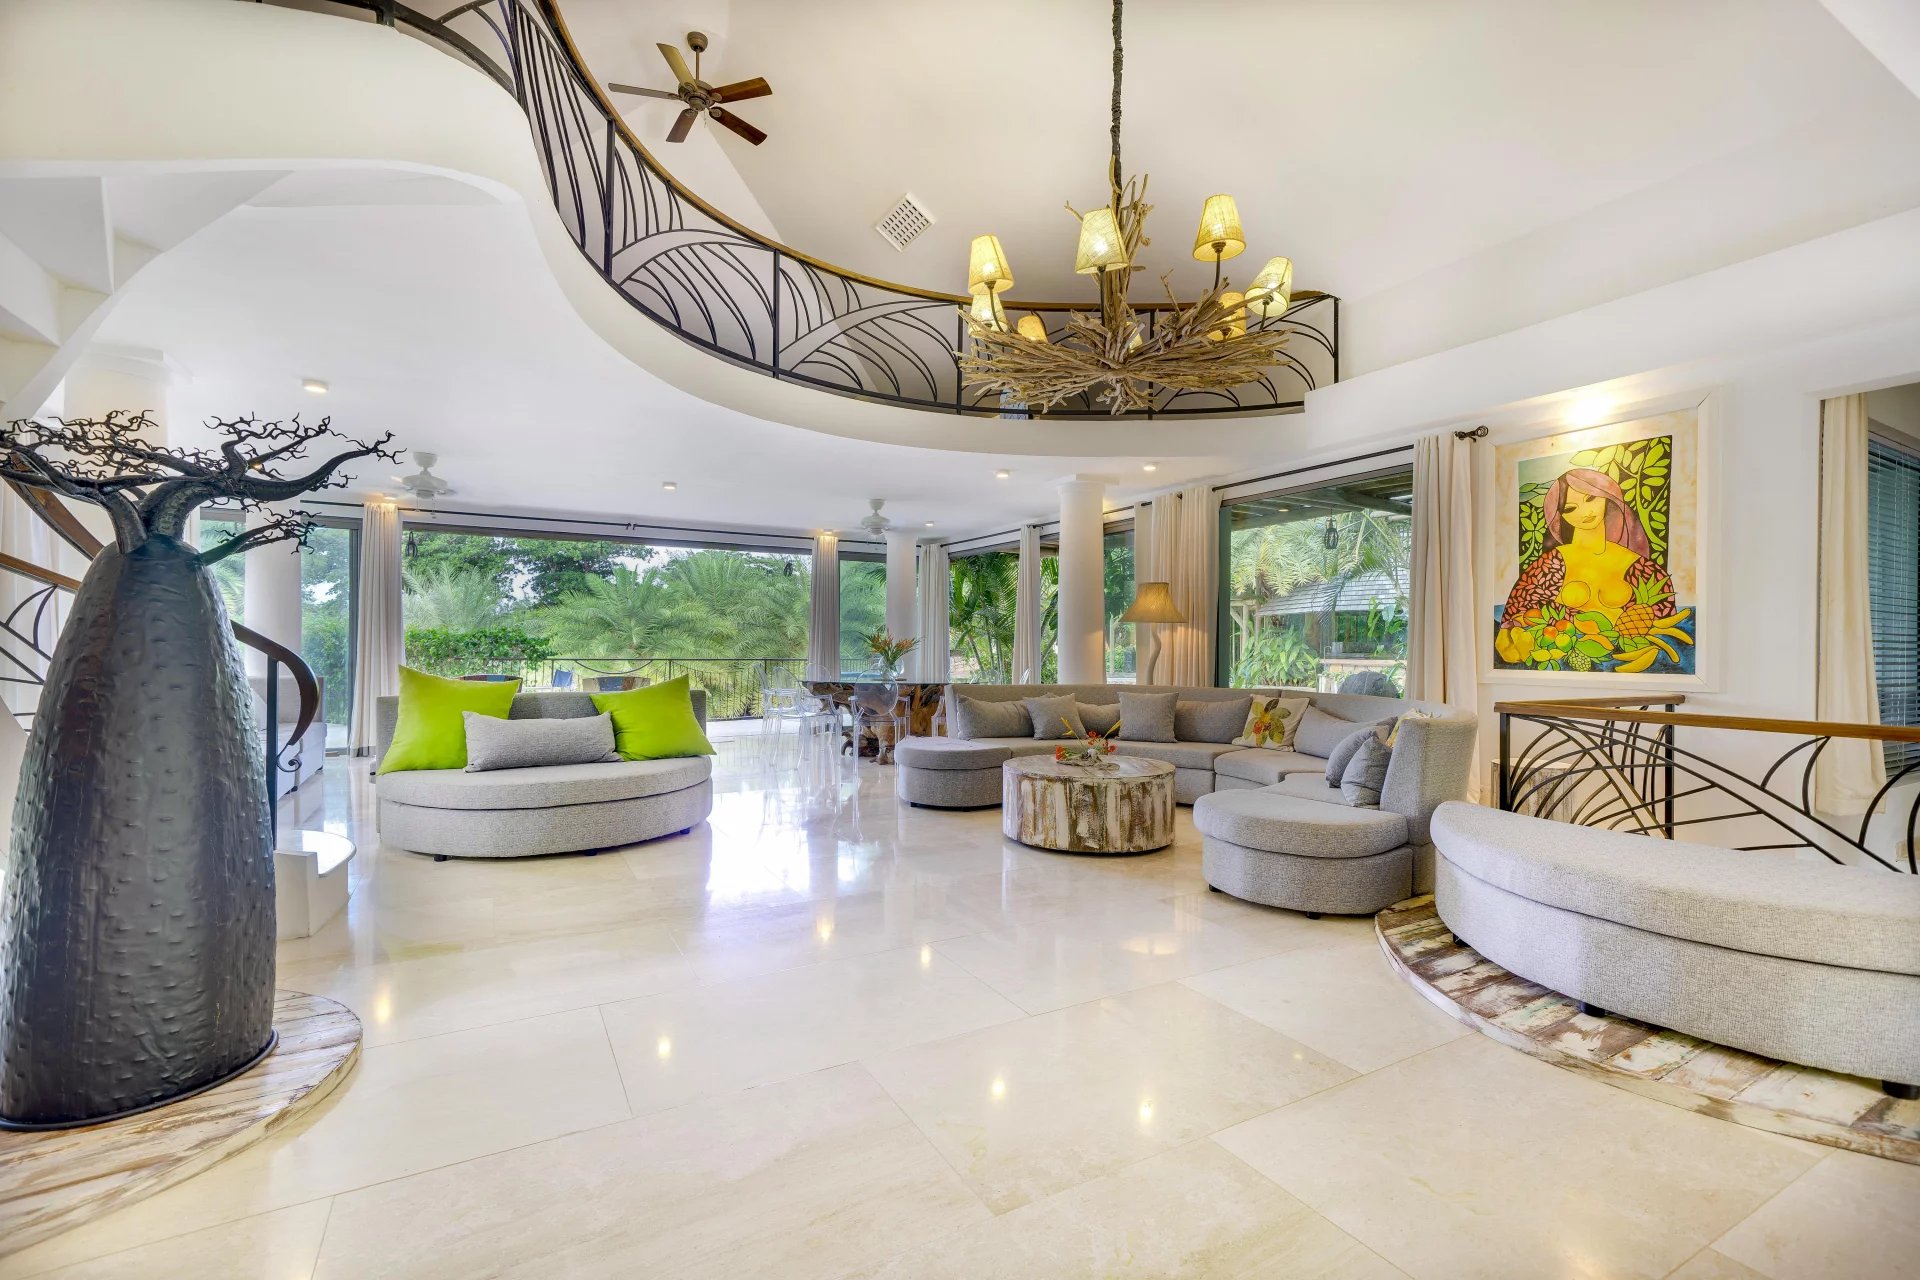 Beau Champ - Mauritius - House, 11 rooms, 8 bedrooms - Slideshow Picture 2